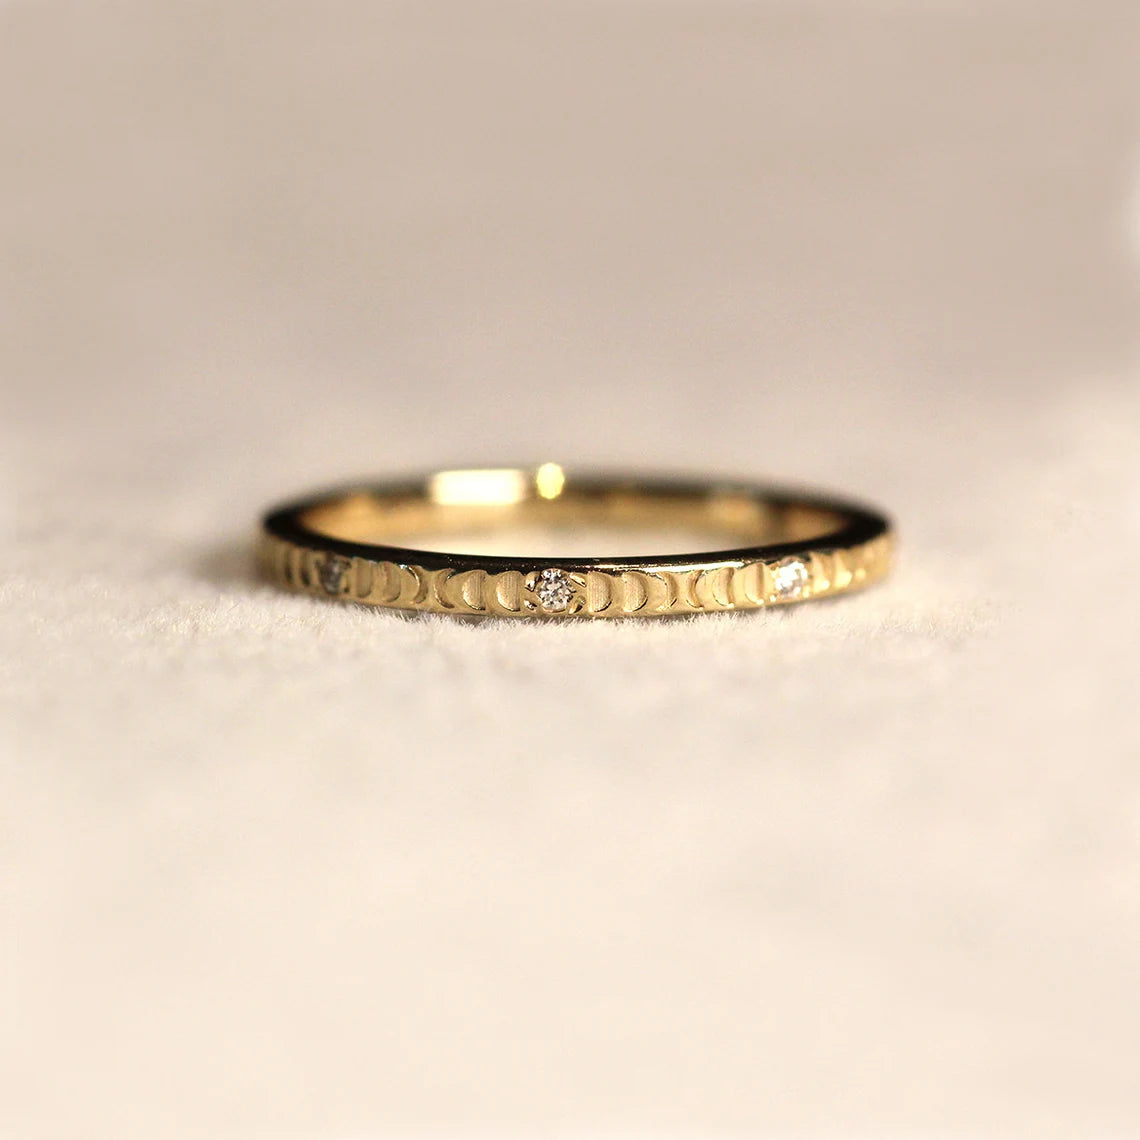 Moon Engraving with Natural Diamond Ring in 14k Gold